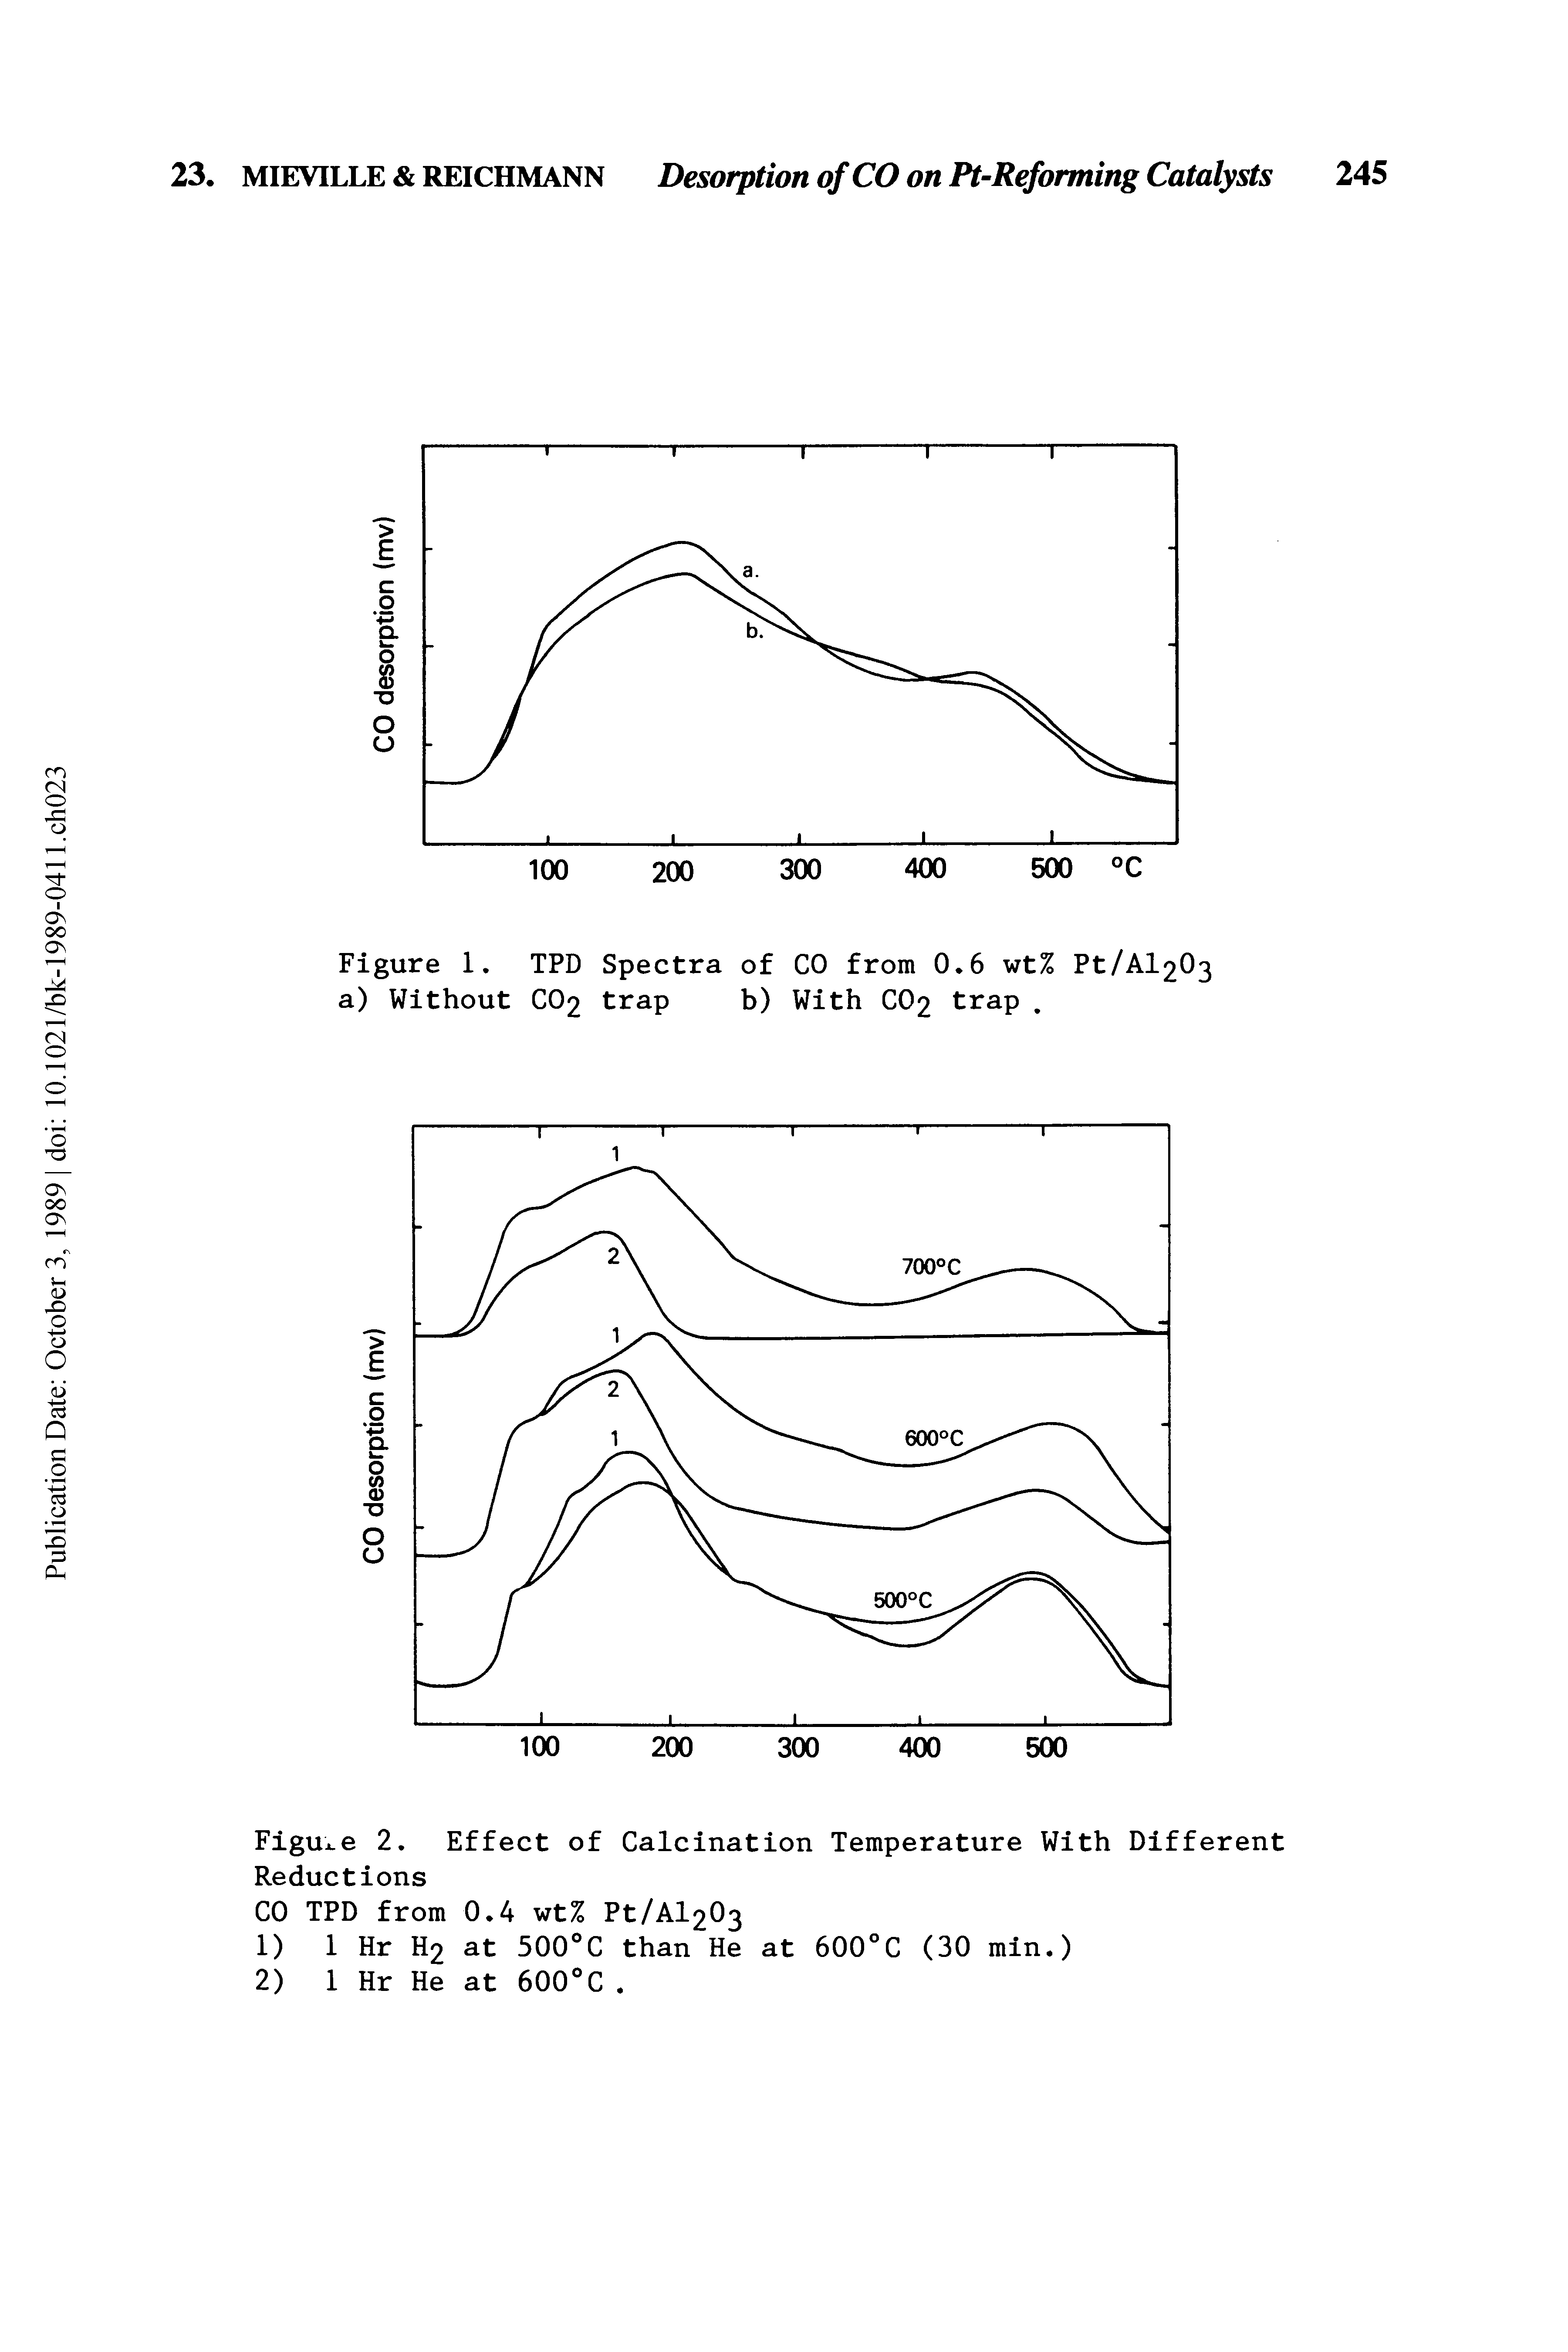 Figure 2. Effect of Calcination Temperature With Different Reductions...